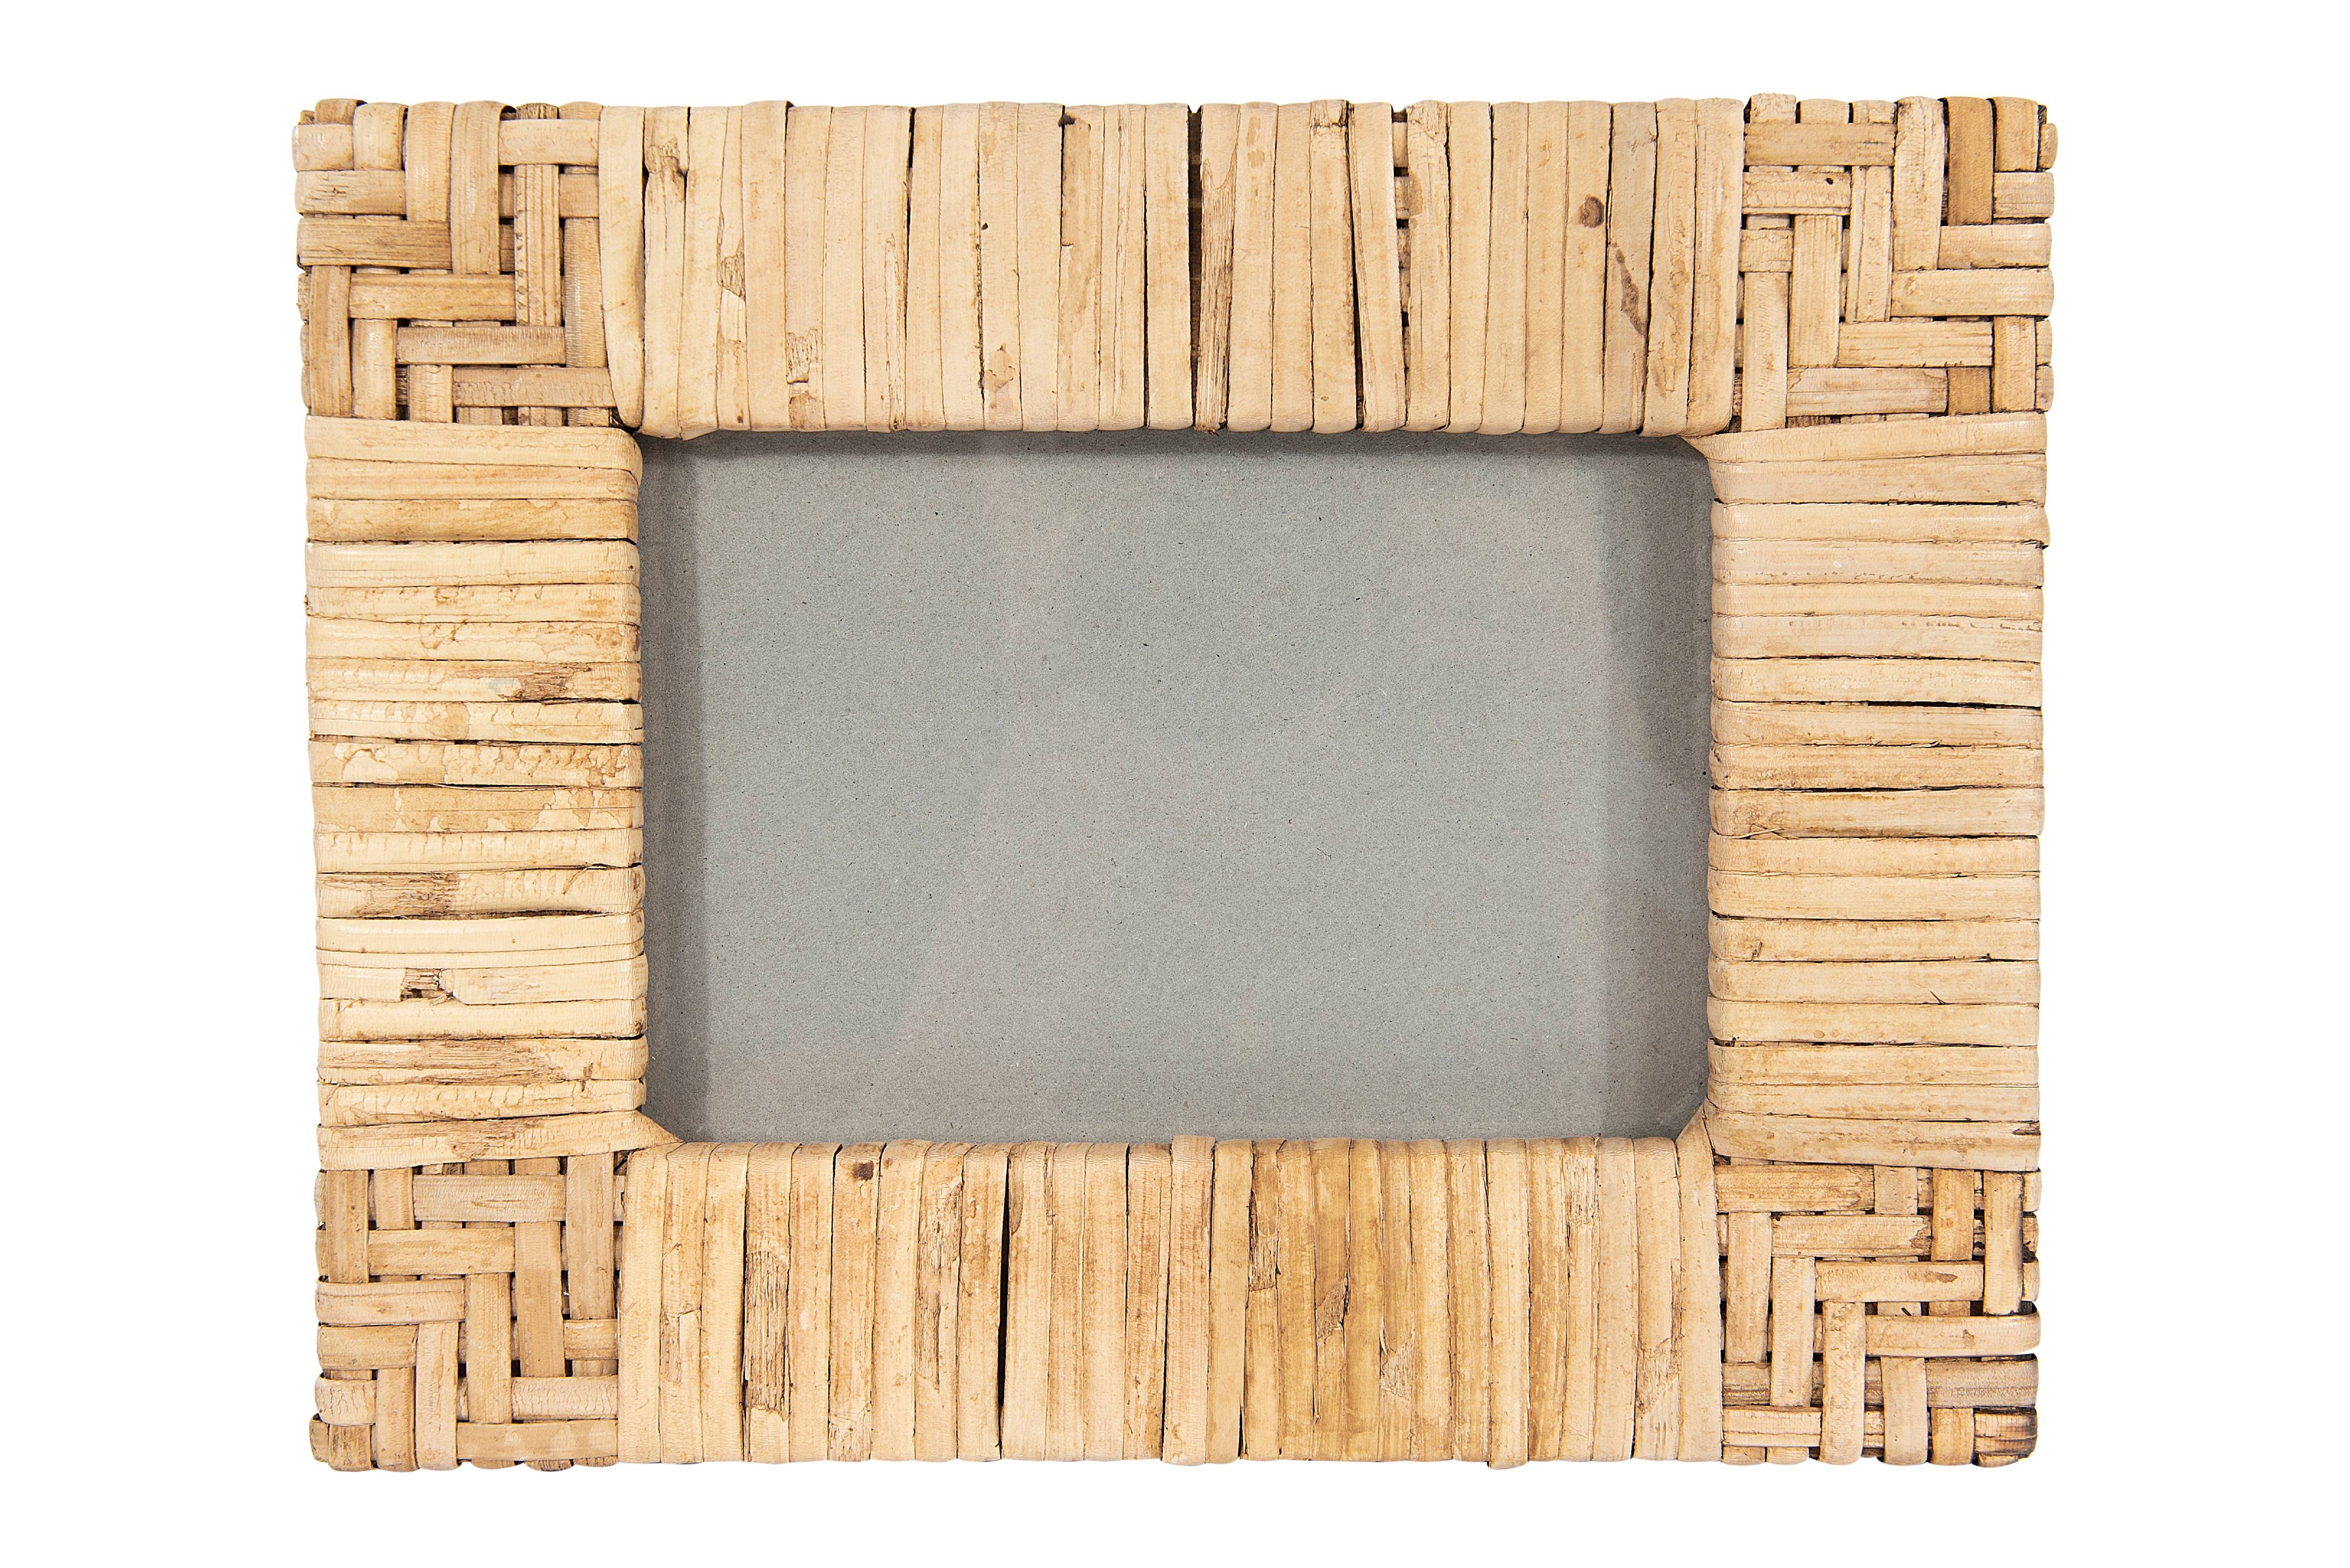 Handwoven Rattan Photo Frame (Holds 4" x 6" Photo) - Nomad Home